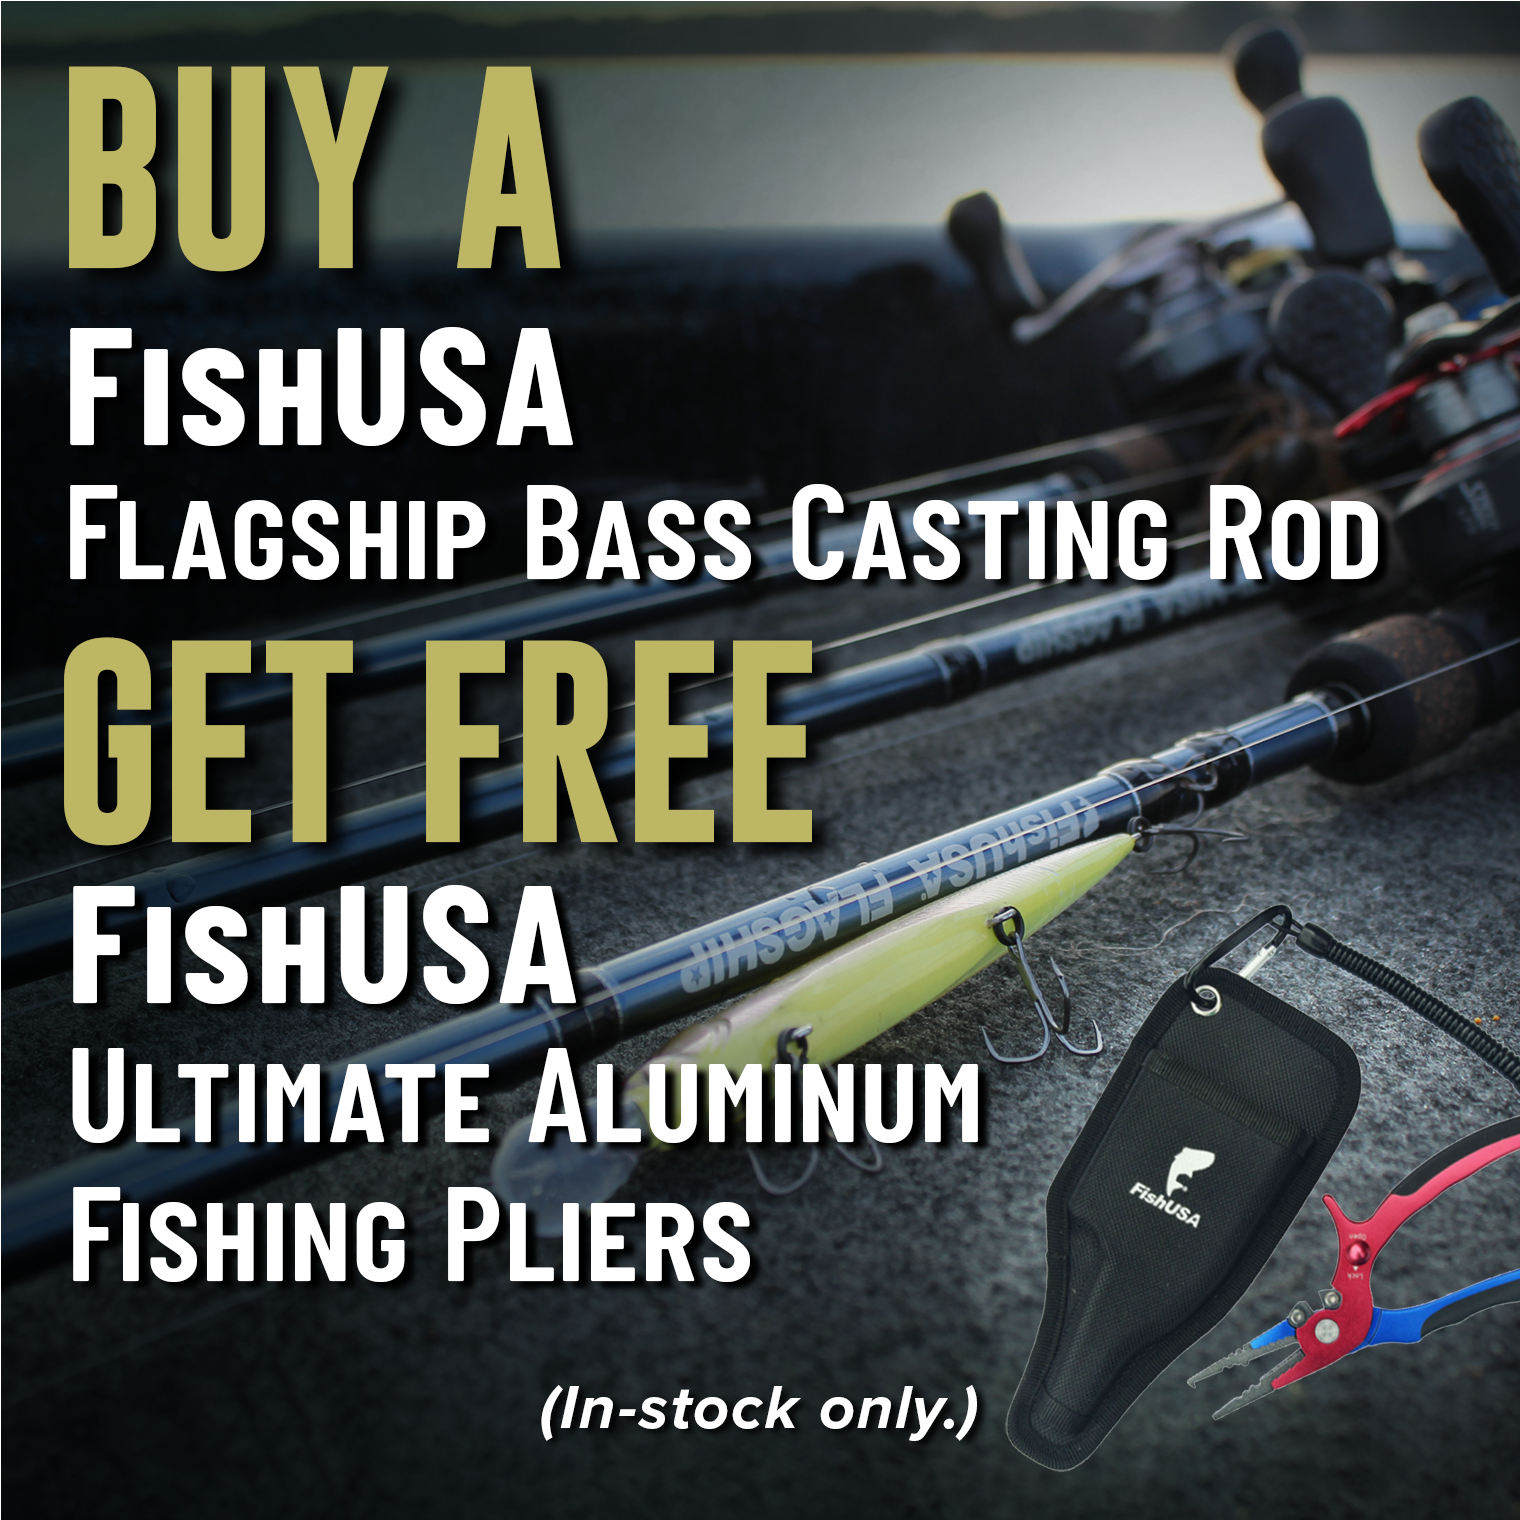 Buy a FishUSA Flagship Bass Casting Rod Get a Free FishUSA Ultimate Aluminum Fishing Pliers (In-stock only.)